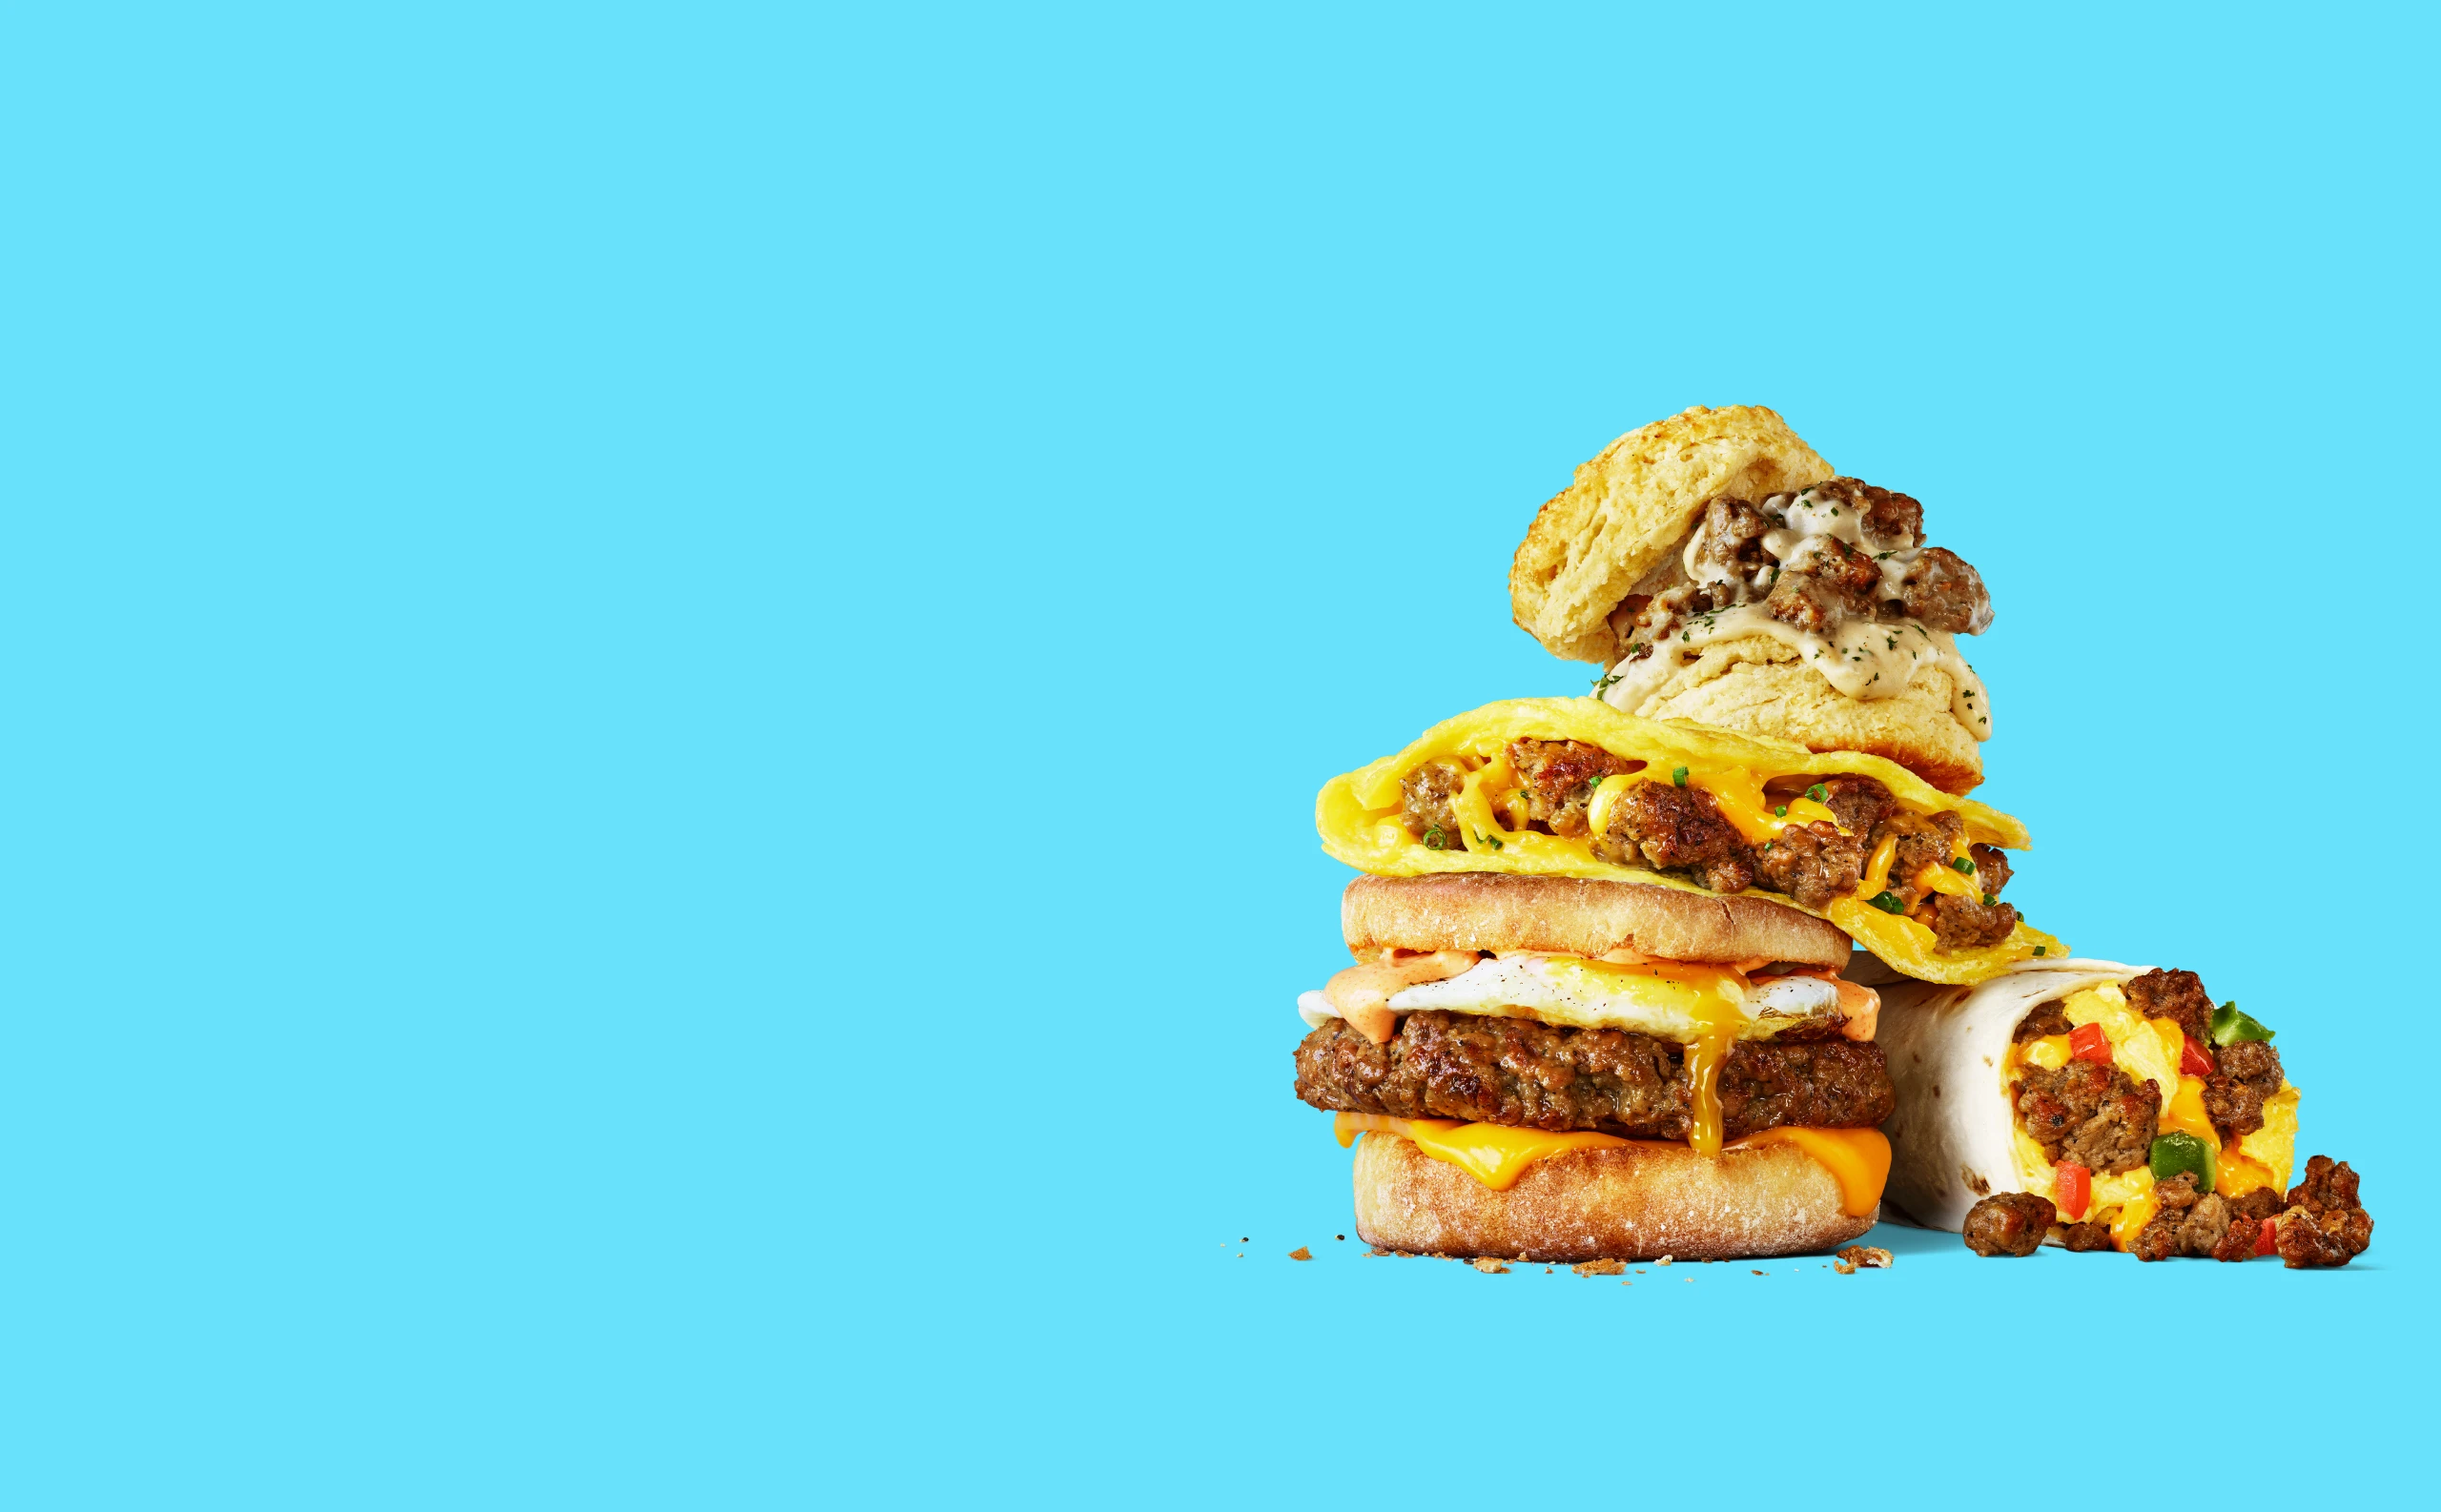 Impossible sausage food items stacked on top of one another on blue background